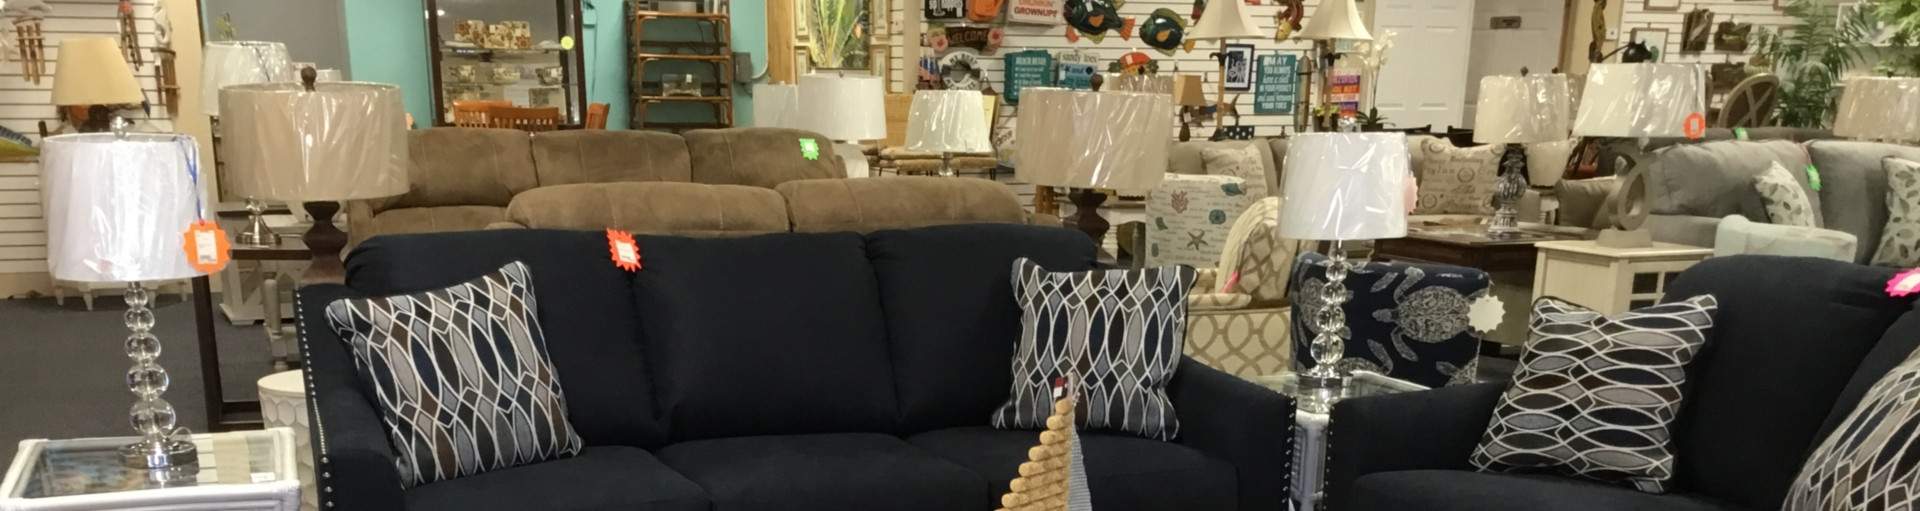 The Warehouse Consignment home store and Original Art